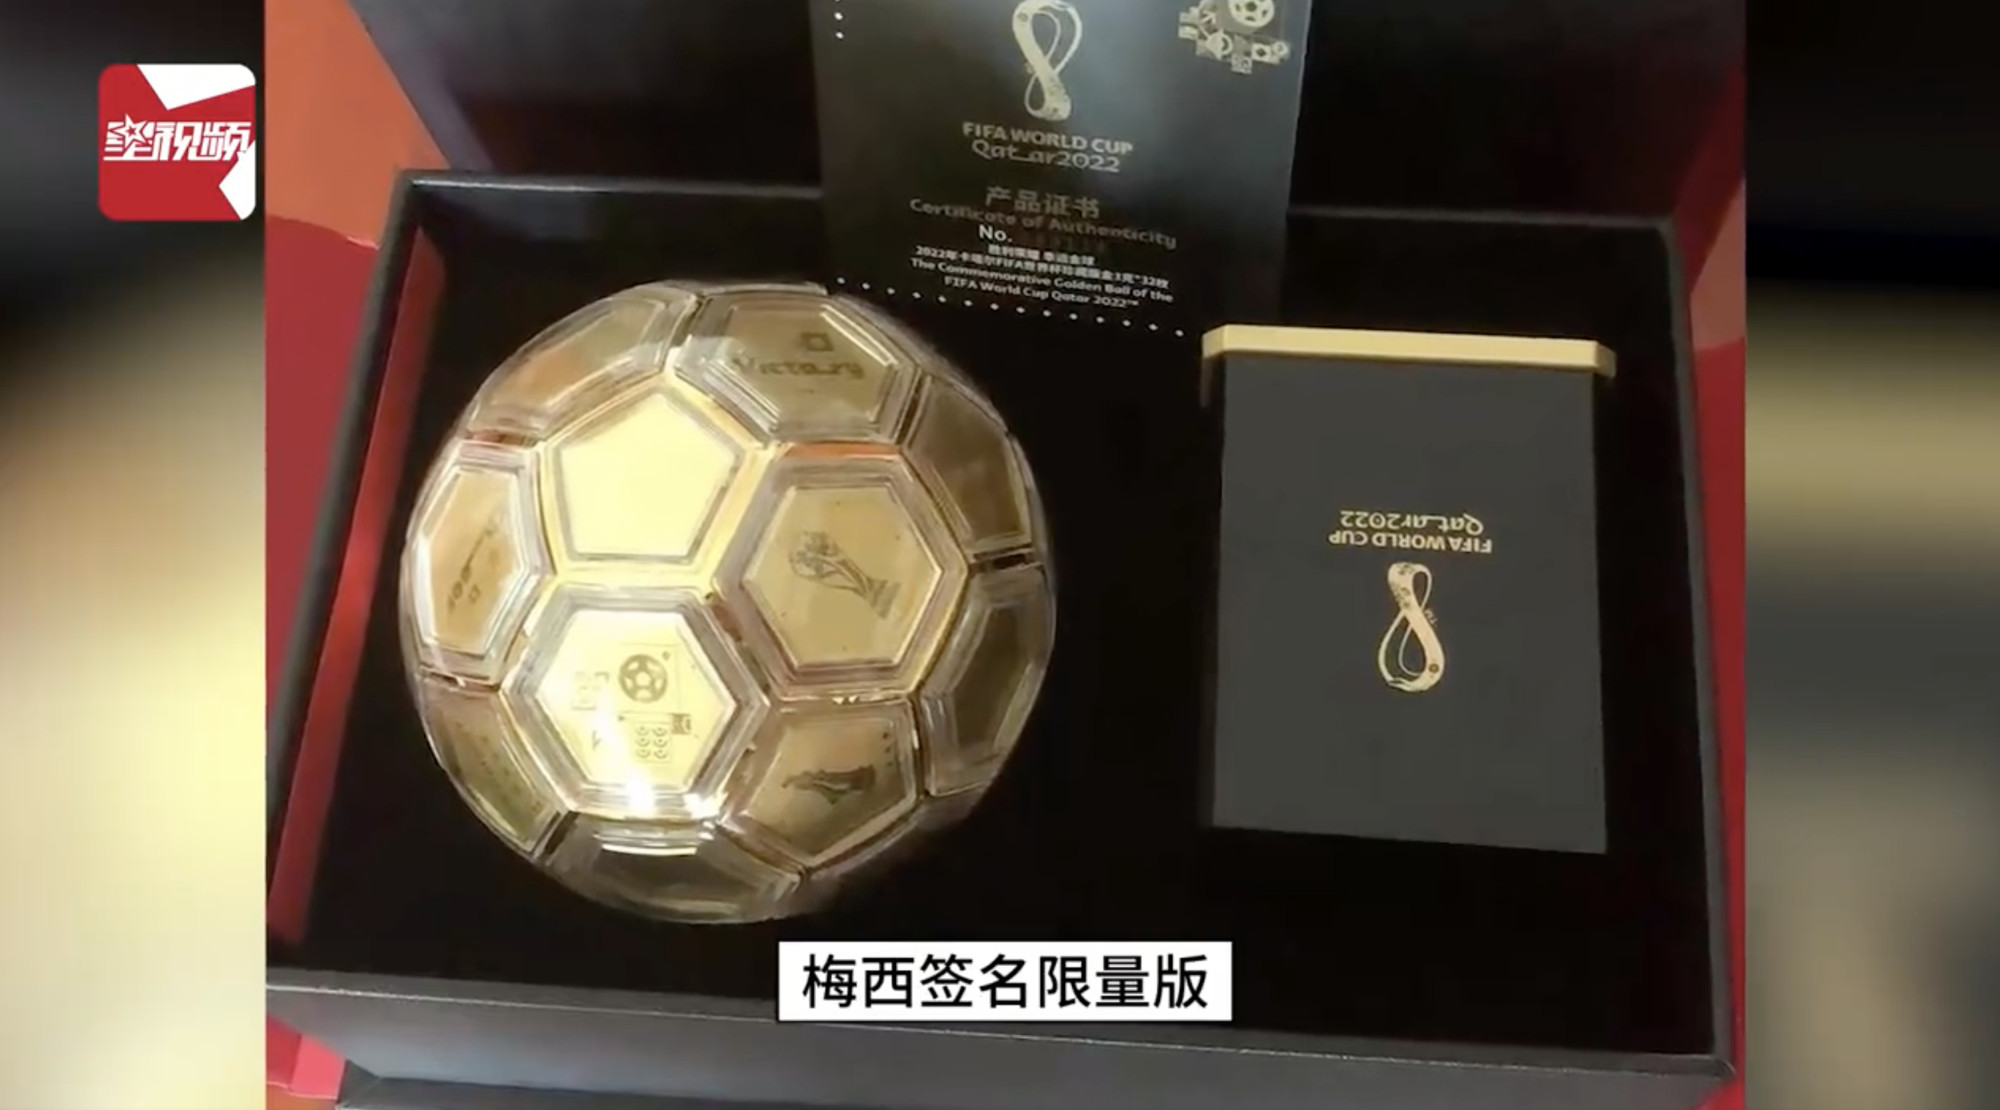 It’s unclear from the local media reports if Xue is a fan of soccer or Lionel Messi or just thought the collectible was a good investment. Photo: Baidu